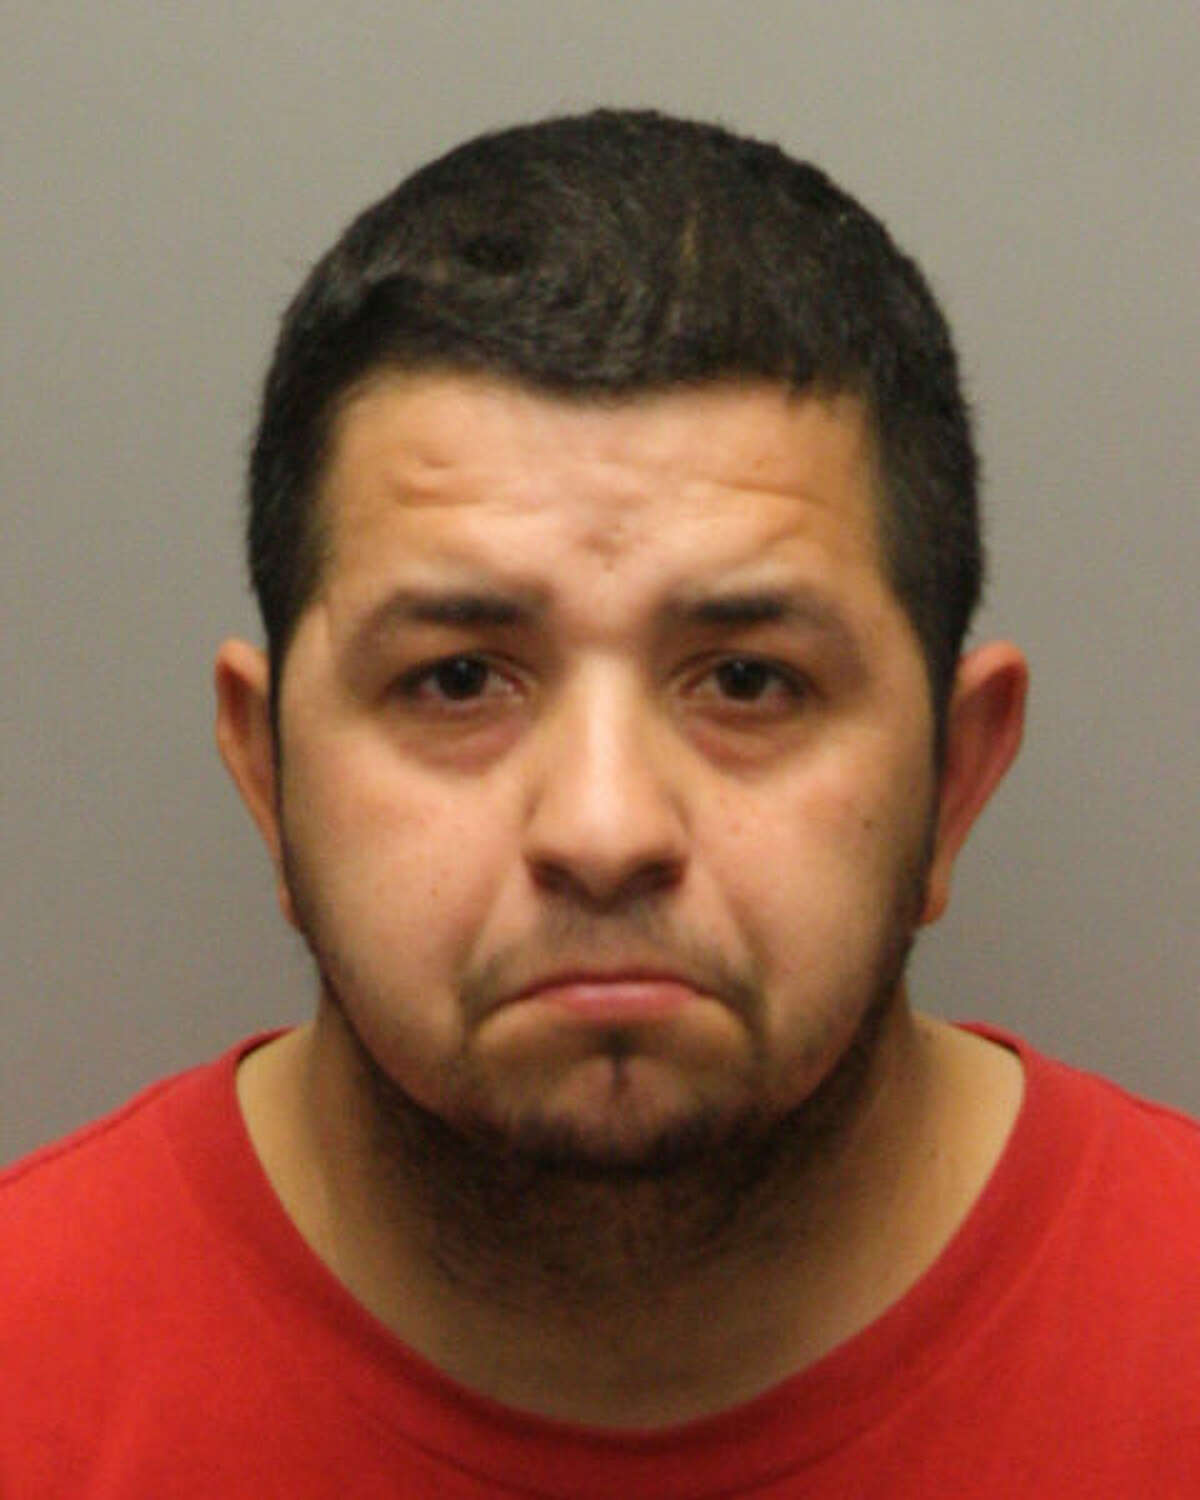 Raul Garcia was arrested as part of the National Johns Suppression Initiative. The national initiative ran during the week leading up to the Super Bowl on Feb. 5, 2017, and targeted johns in 15 states. It led to 178 arrests by the Harris County Sheriff's Office.